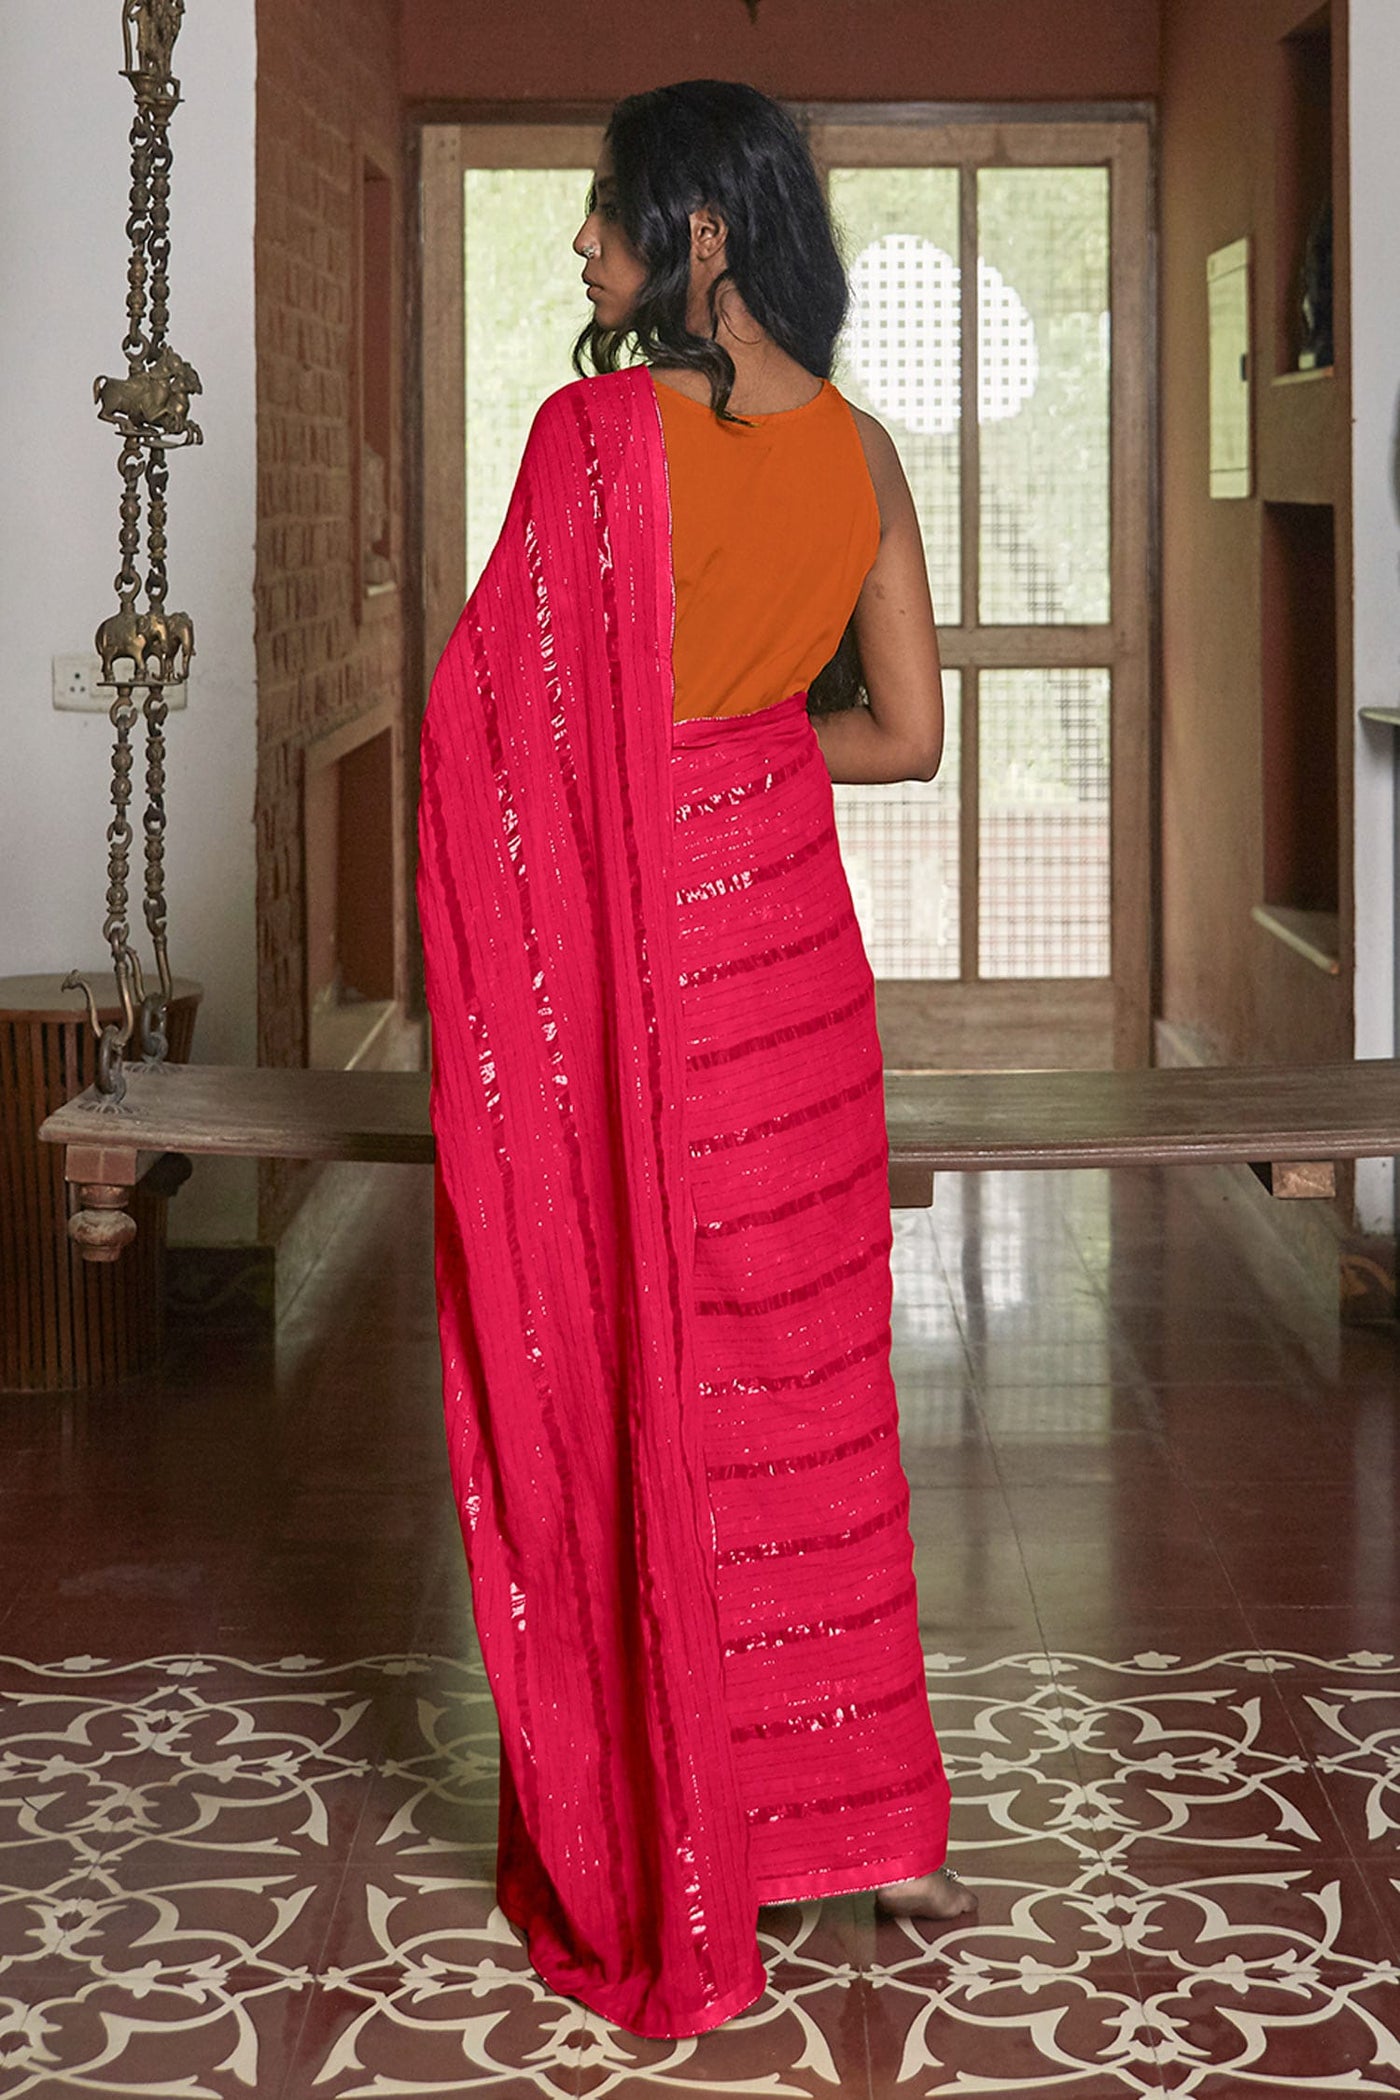 Pink Organic Dyed Saree - Indian Clothing in Denver, CO, Aurora, CO, Boulder, CO, Fort Collins, CO, Colorado Springs, CO, Parker, CO, Highlands Ranch, CO, Cherry Creek, CO, Centennial, CO, and Longmont, CO. Nationwide shipping USA - India Fashion X